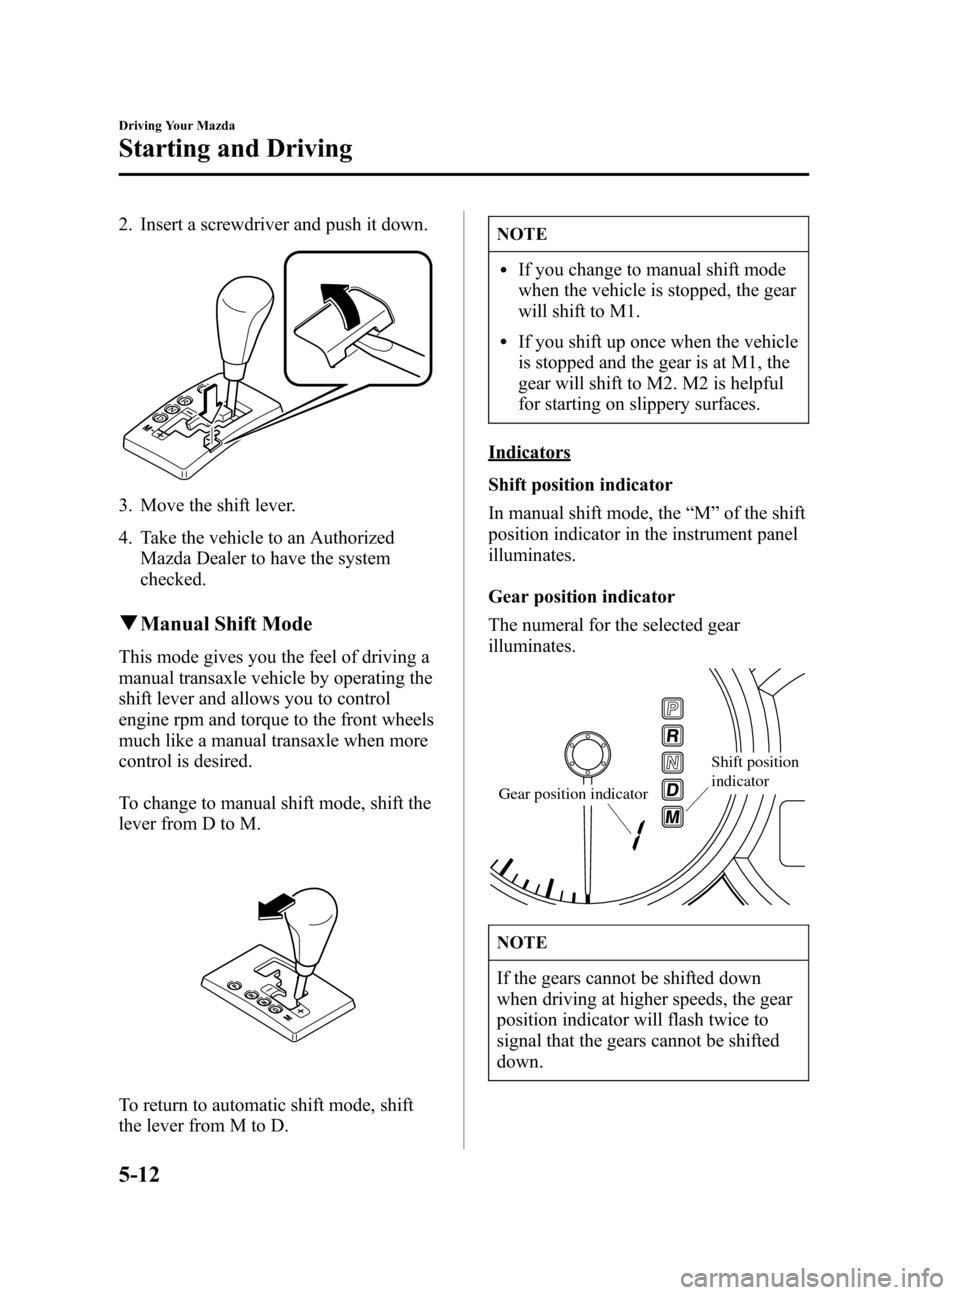 MAZDA MODEL 3 HATCHBACK 2005  Owners Manual (in English) Black plate (122,1)
2. Insert a screwdriver and push it down.
3. Move the shift lever.
4. Take the vehicle to an Authorized
Mazda Dealer to have the system
checked.
qManual Shift Mode
This mode gives 